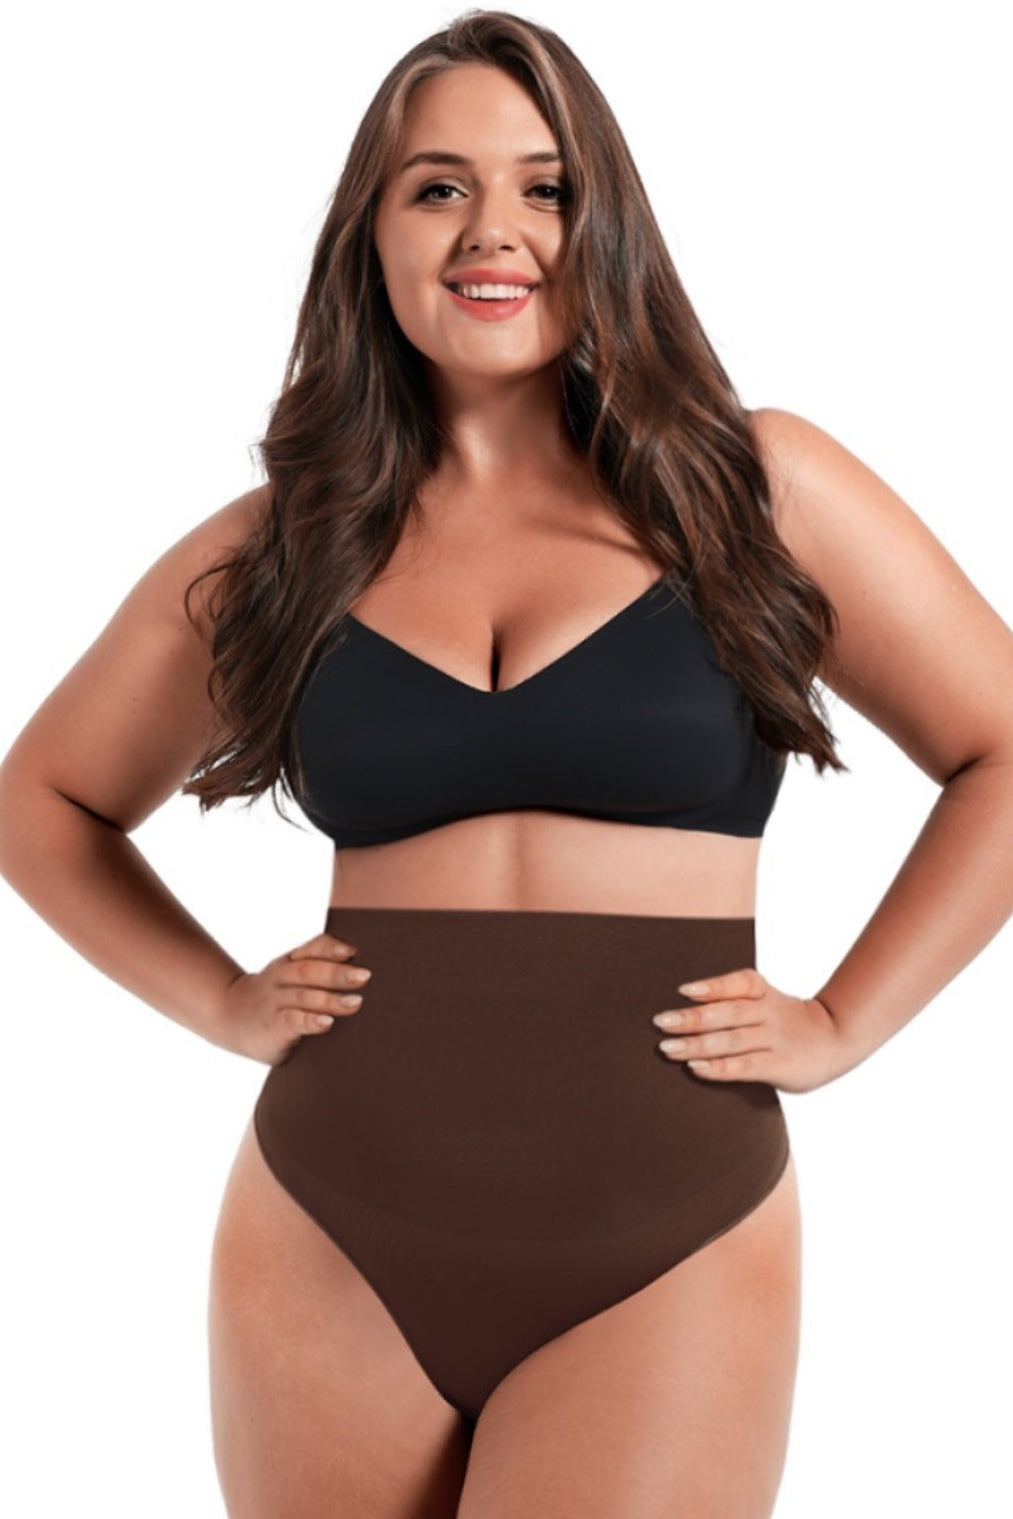 Contour Clothing Tummy Control Underwear - Full back & Thong Styles